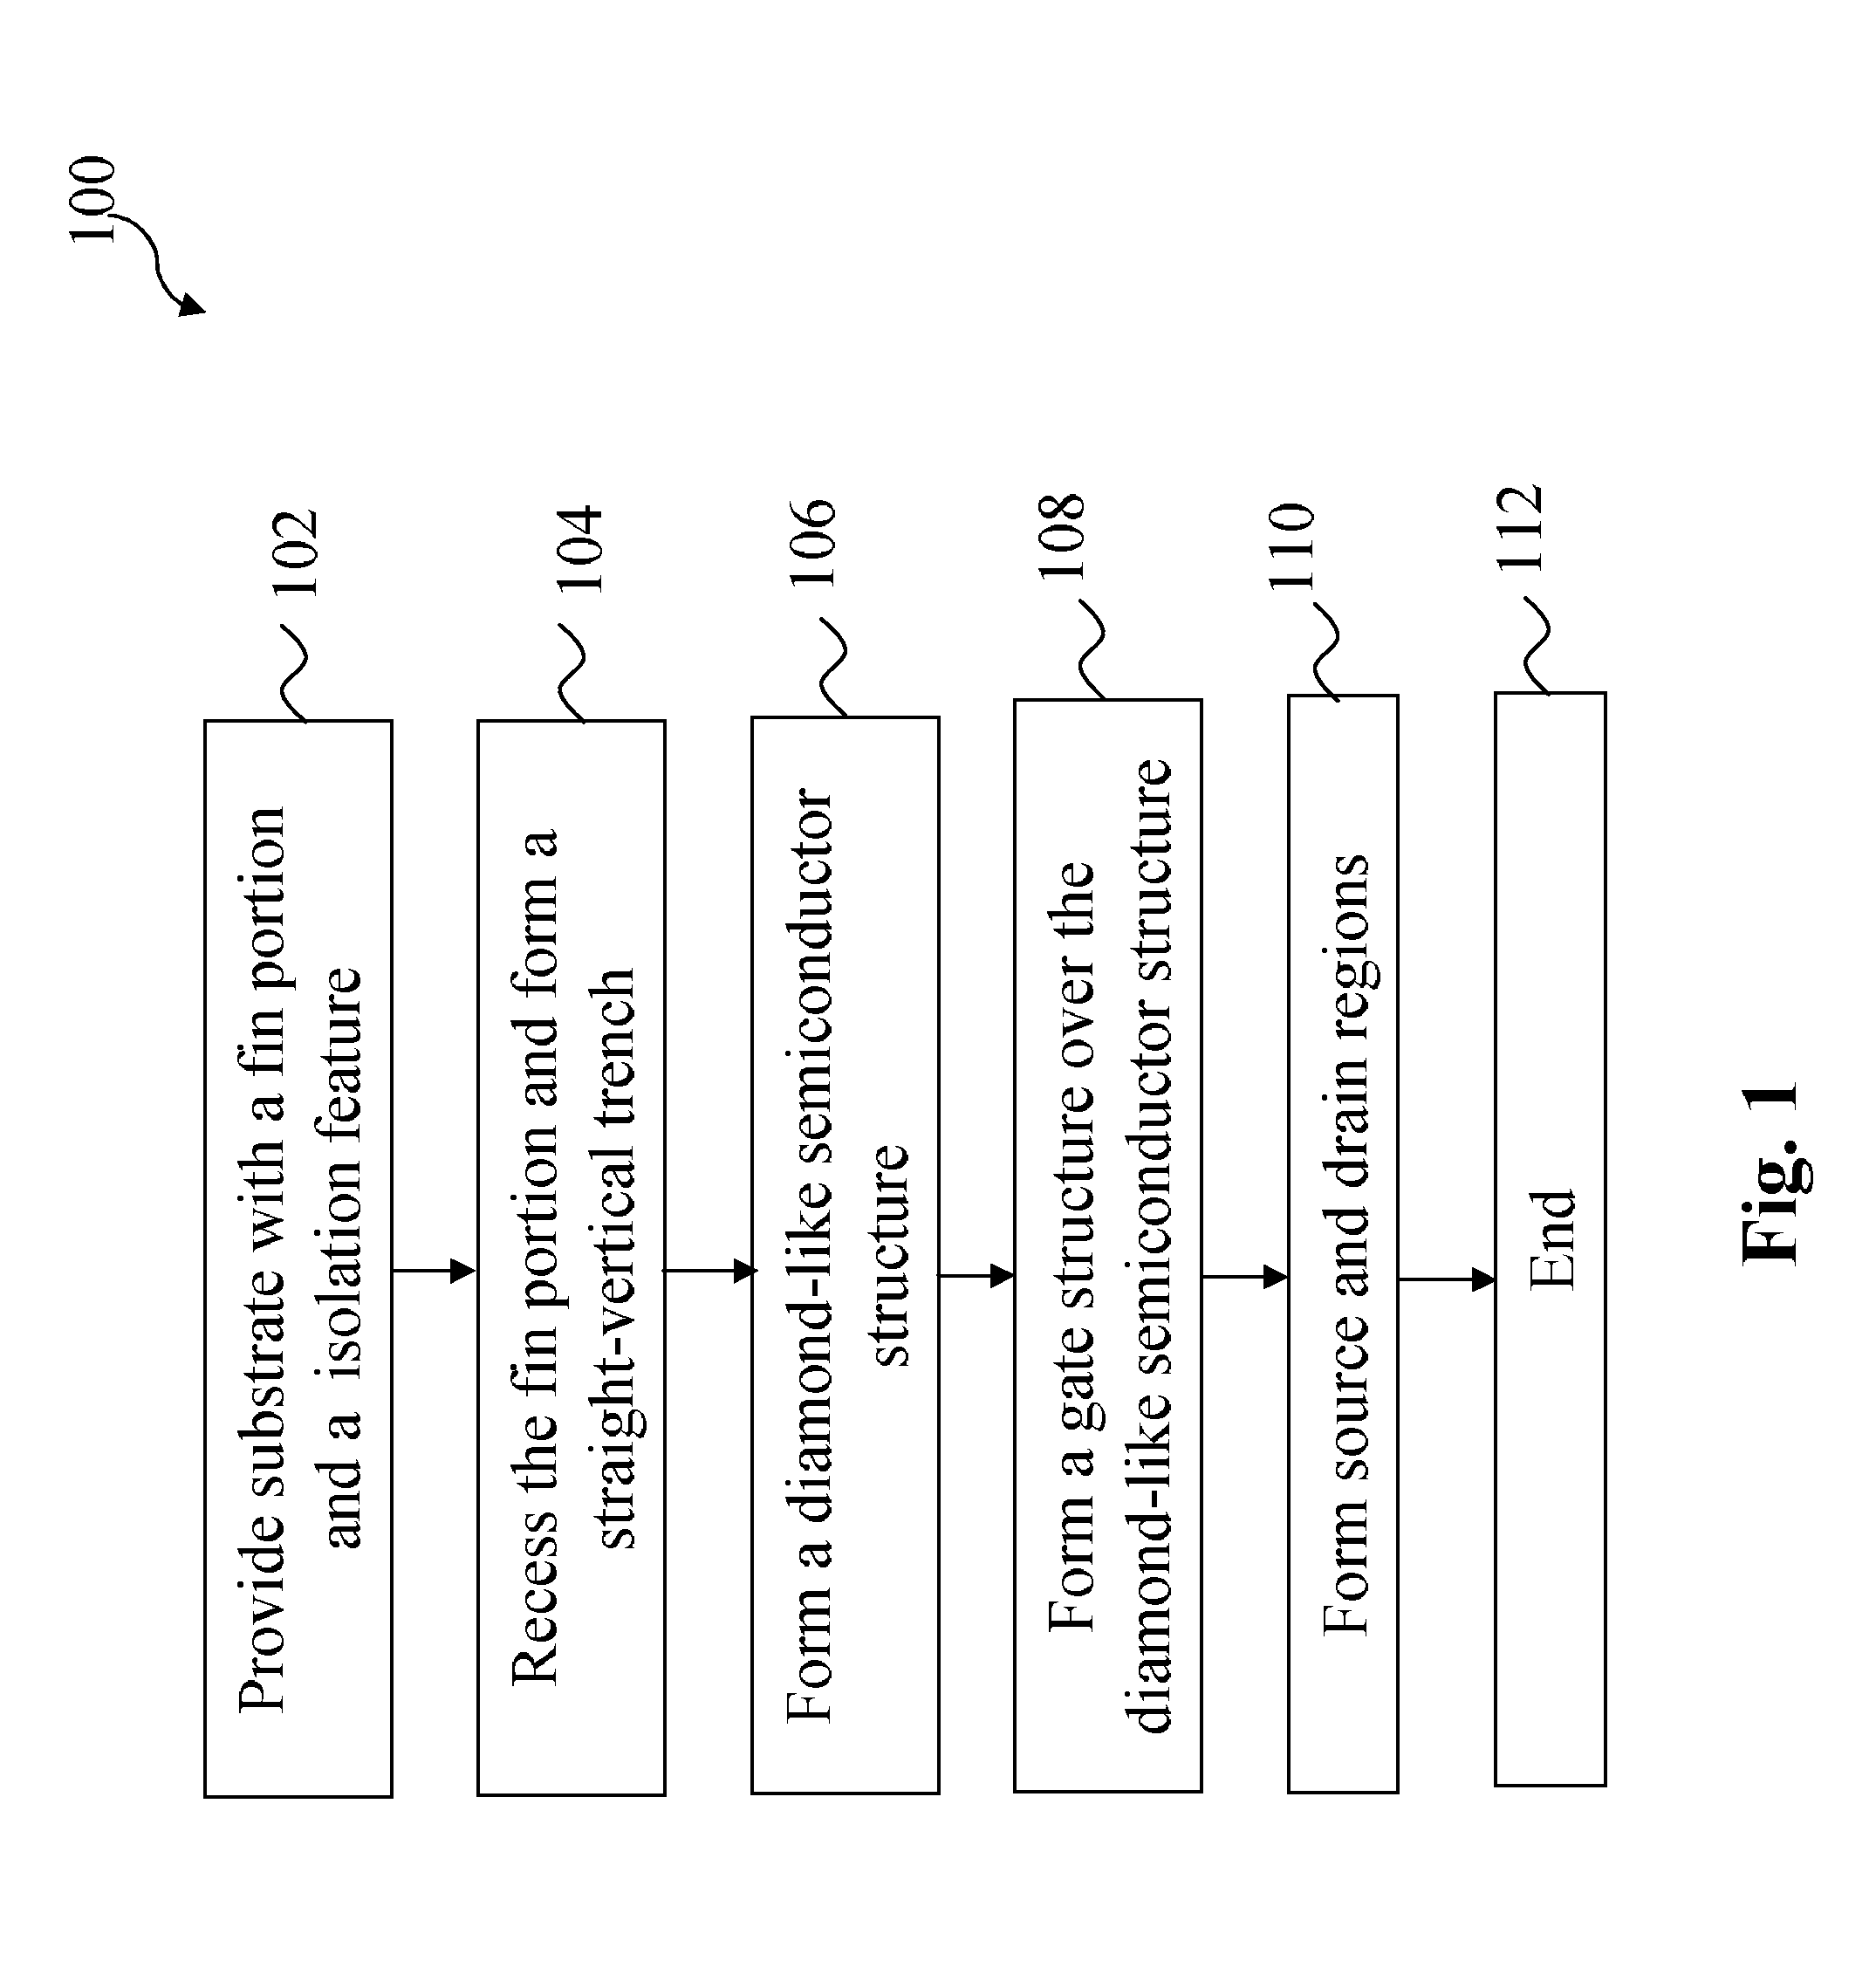 FINFET Device Having A Channel Defined In A Diamond-Like Shape Semiconductor Structure